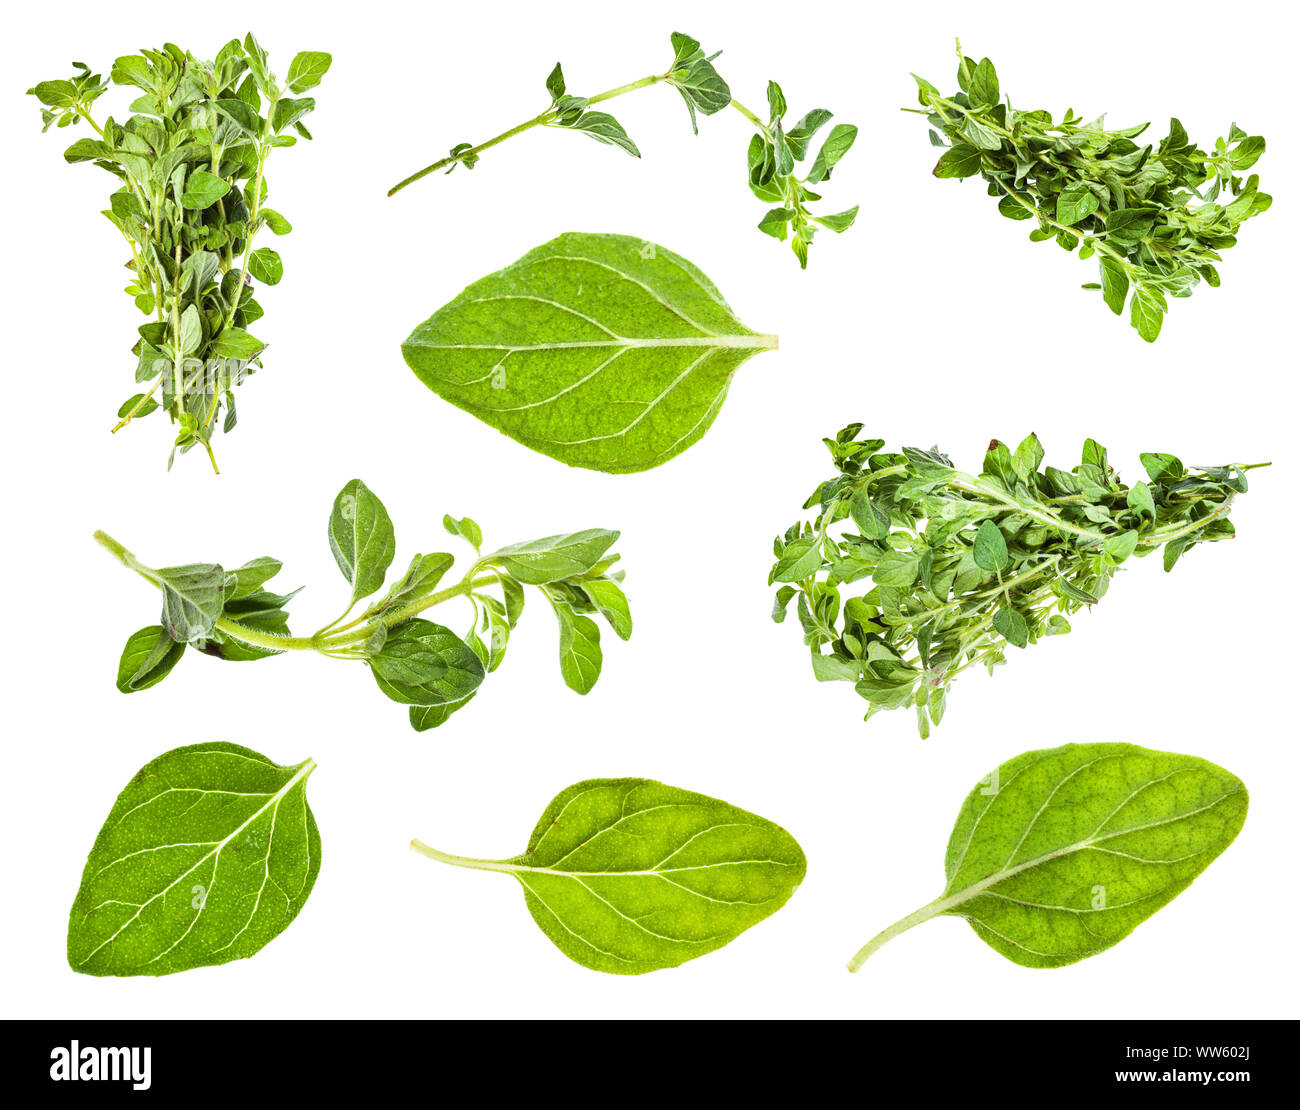 set of leaves and twigs of oregano plant isolated on white background Stock Photo